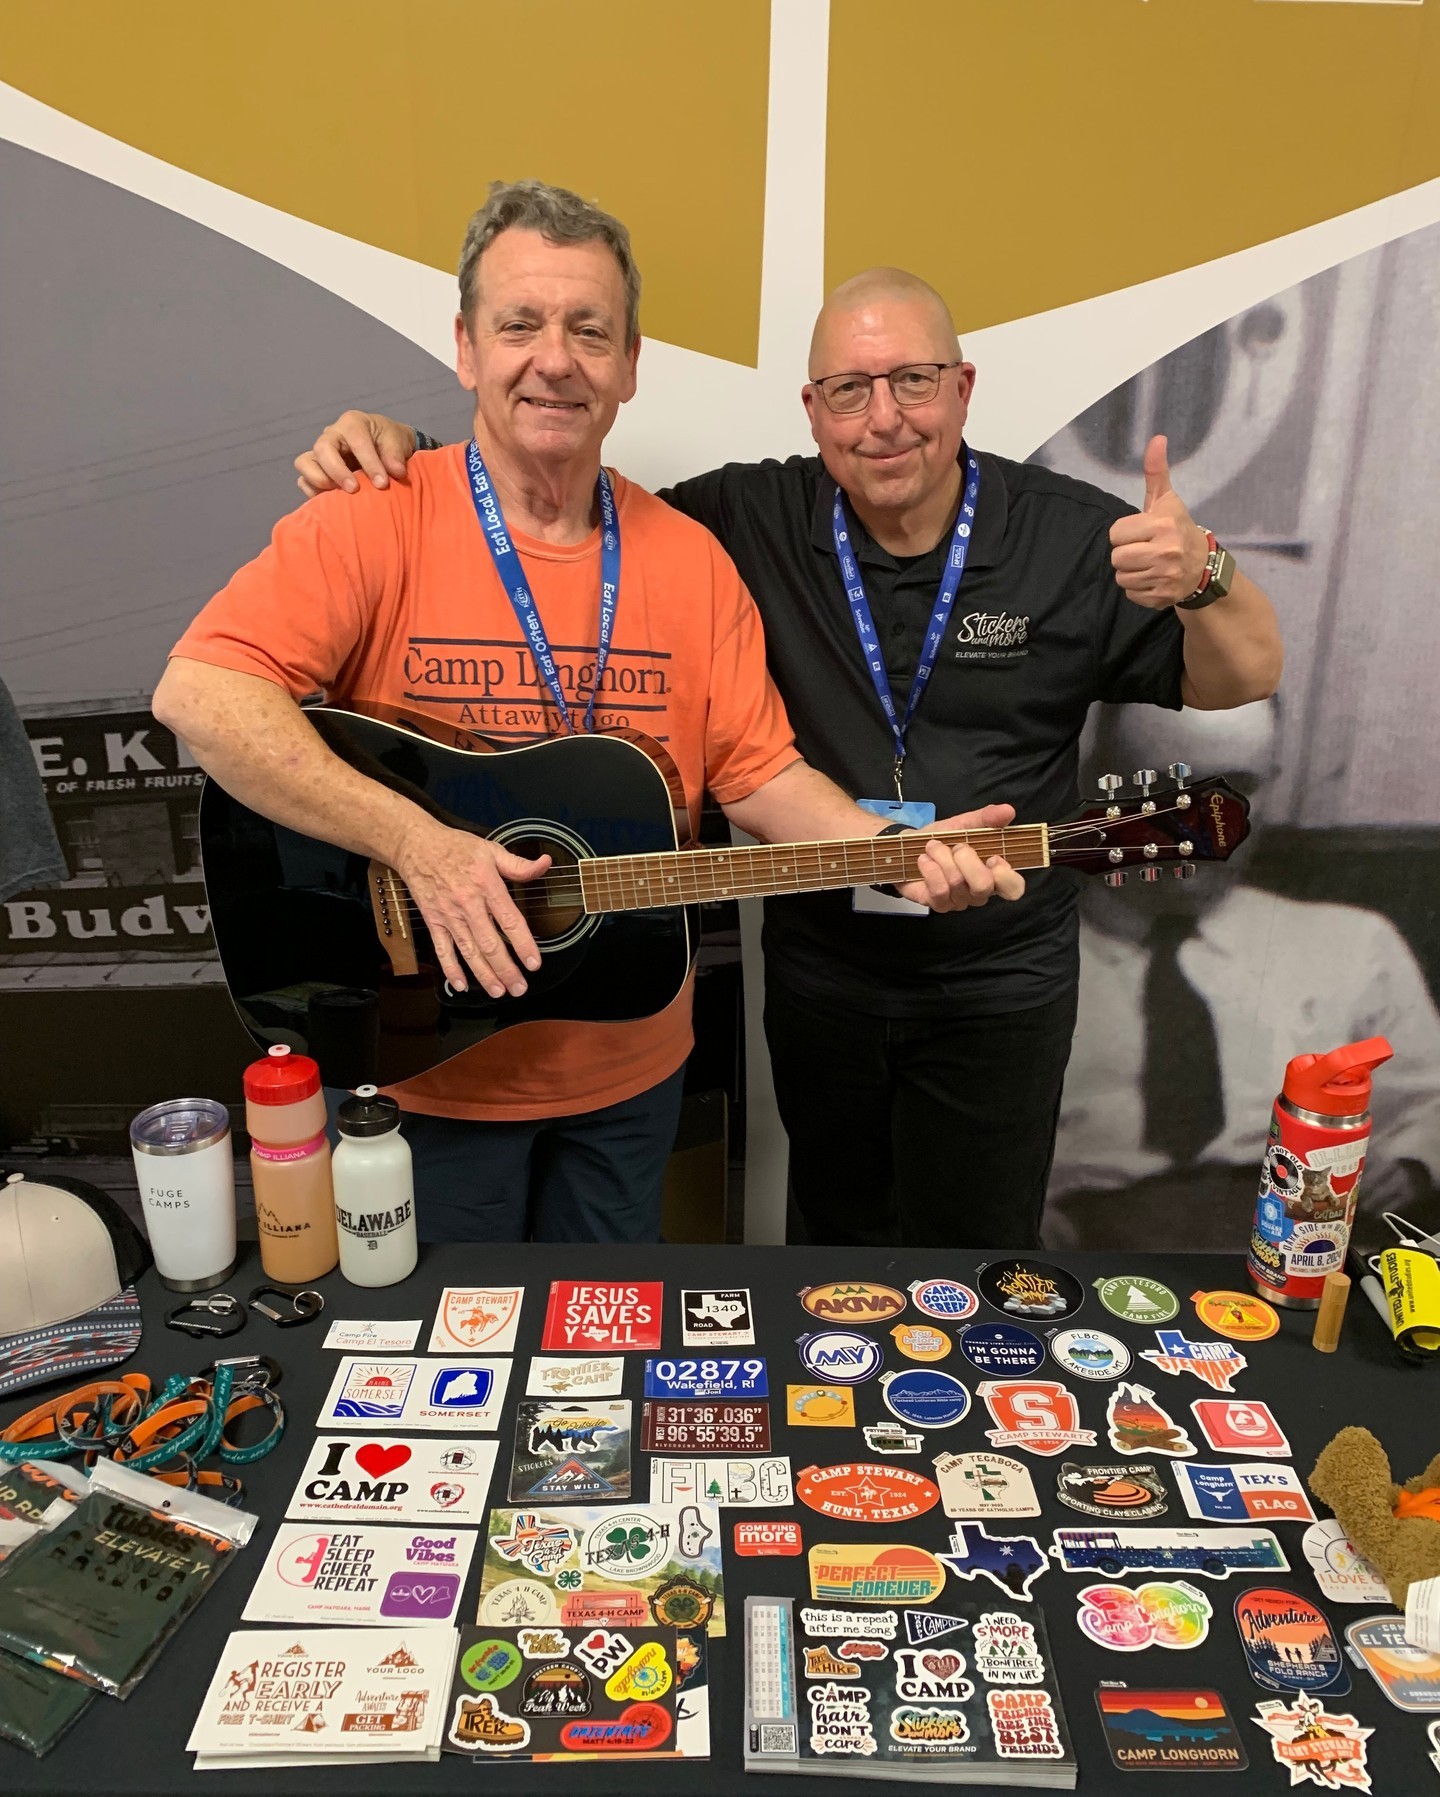 We 💚 Giving Away Guitars

At all the conferences we attend, we give away a guitar! Stop by our booth and enter your name for a chance to win! 🎸 We had a great time at Campfrence Conference

Winner: Roger Moore from Camp Longhorn

#StickersAndMore
#ElevateYourBrand